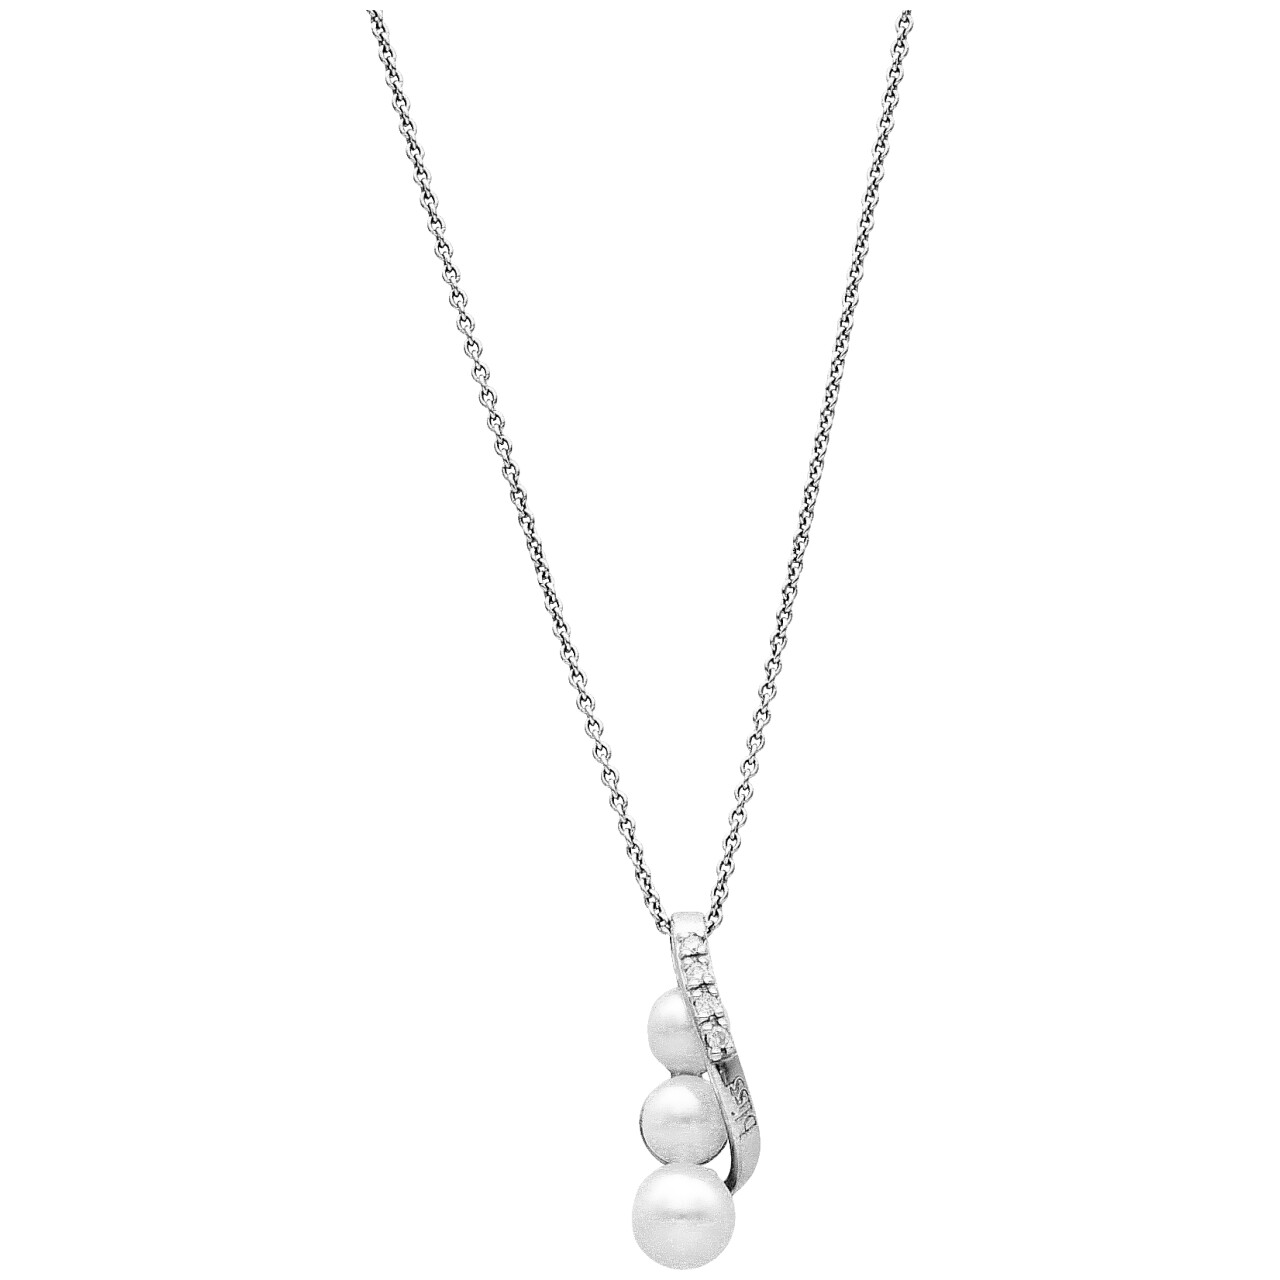 Bliss white gold necklace with pearls and zircons